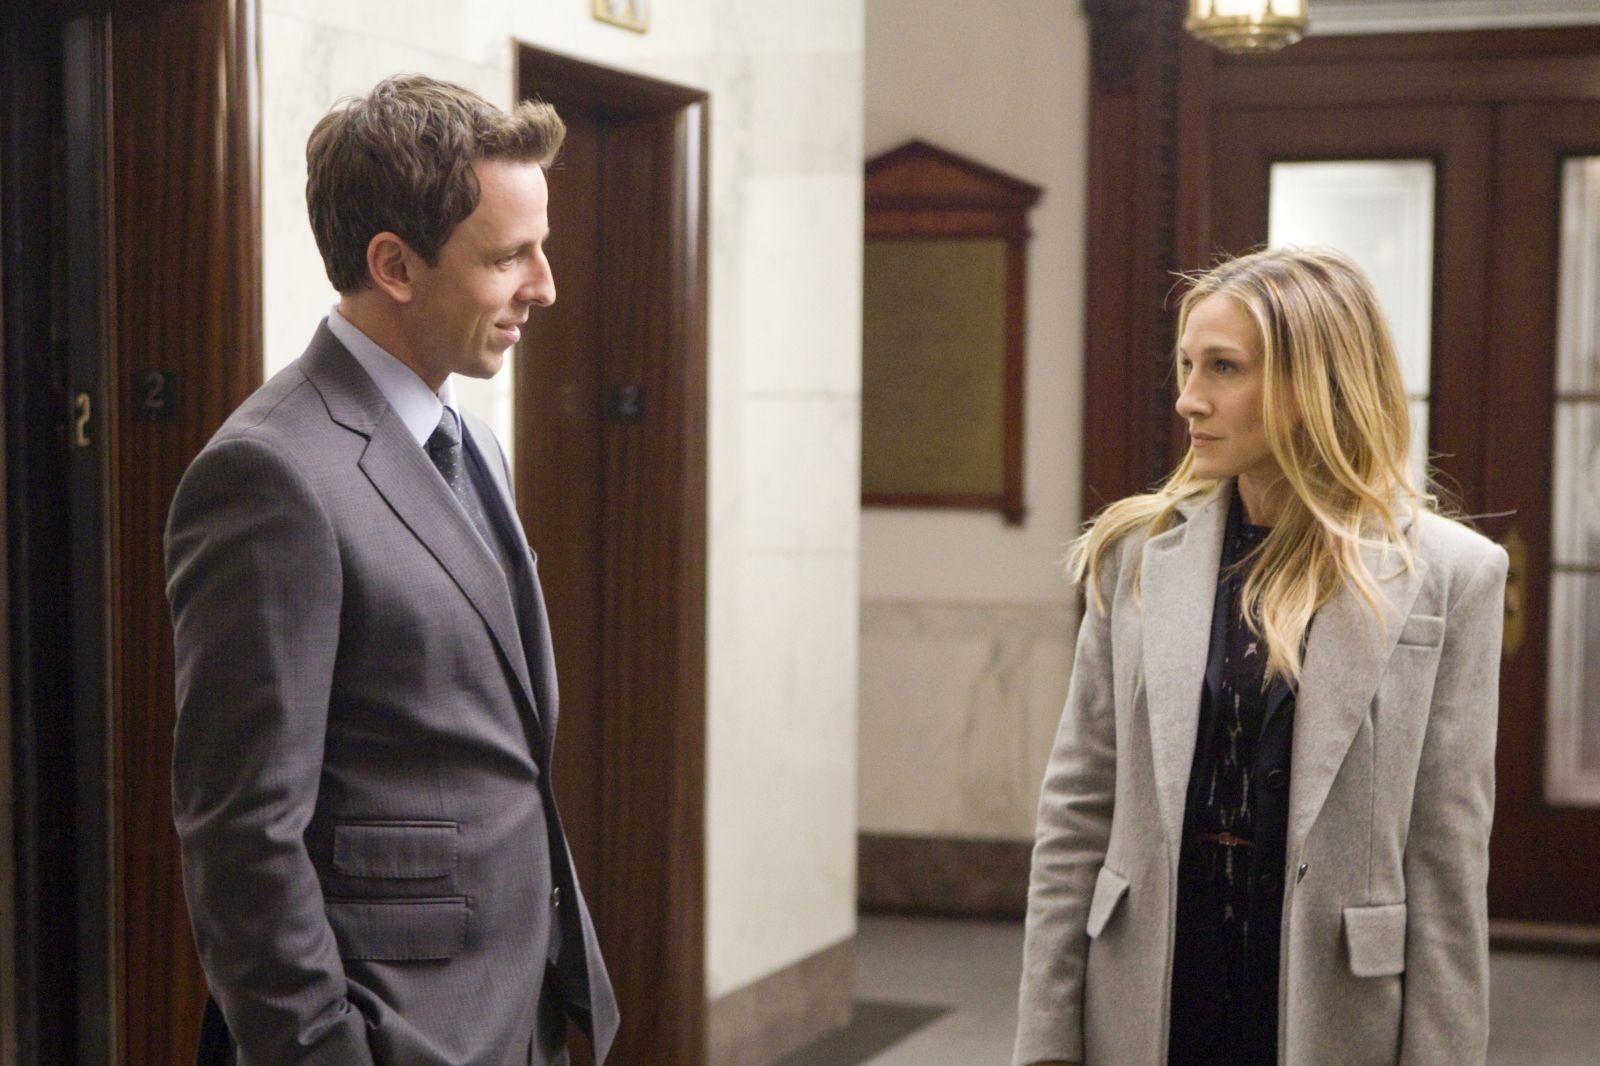 Seth Meyers stars as Chris Bunce and Sarah Jessica Parker stars as Kate Reddy in The Weinstein Company's I Don't Know How She Does It (2011). Photo credit by Craig Blankenhorn.